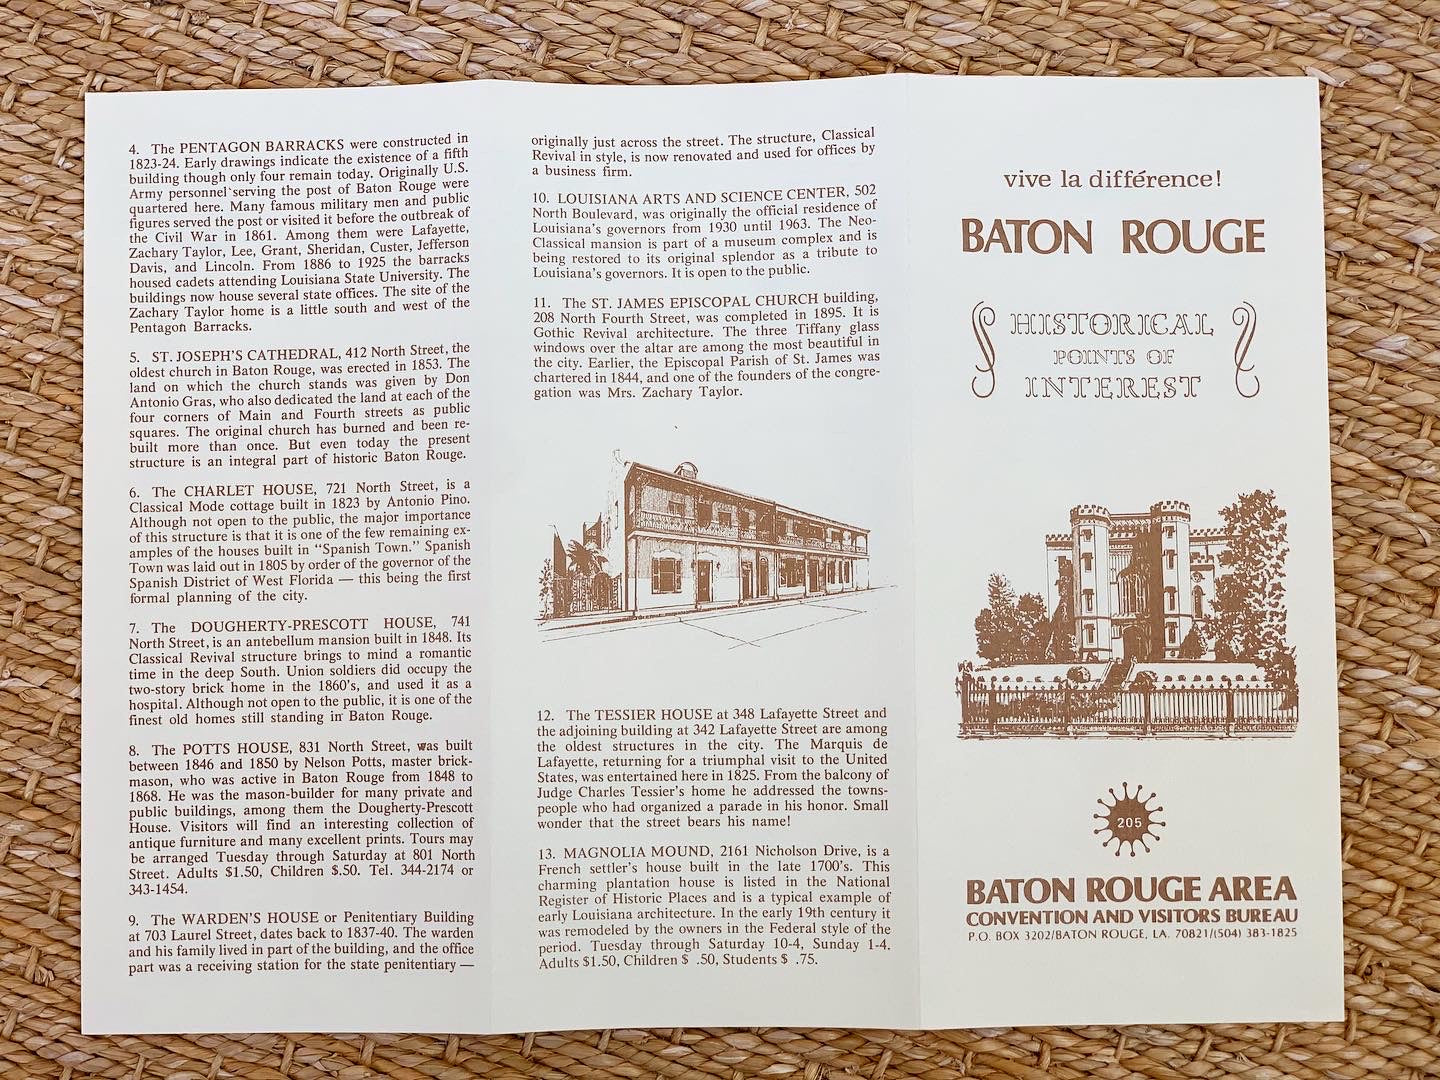 Local Baton Rouge Guides (1964)